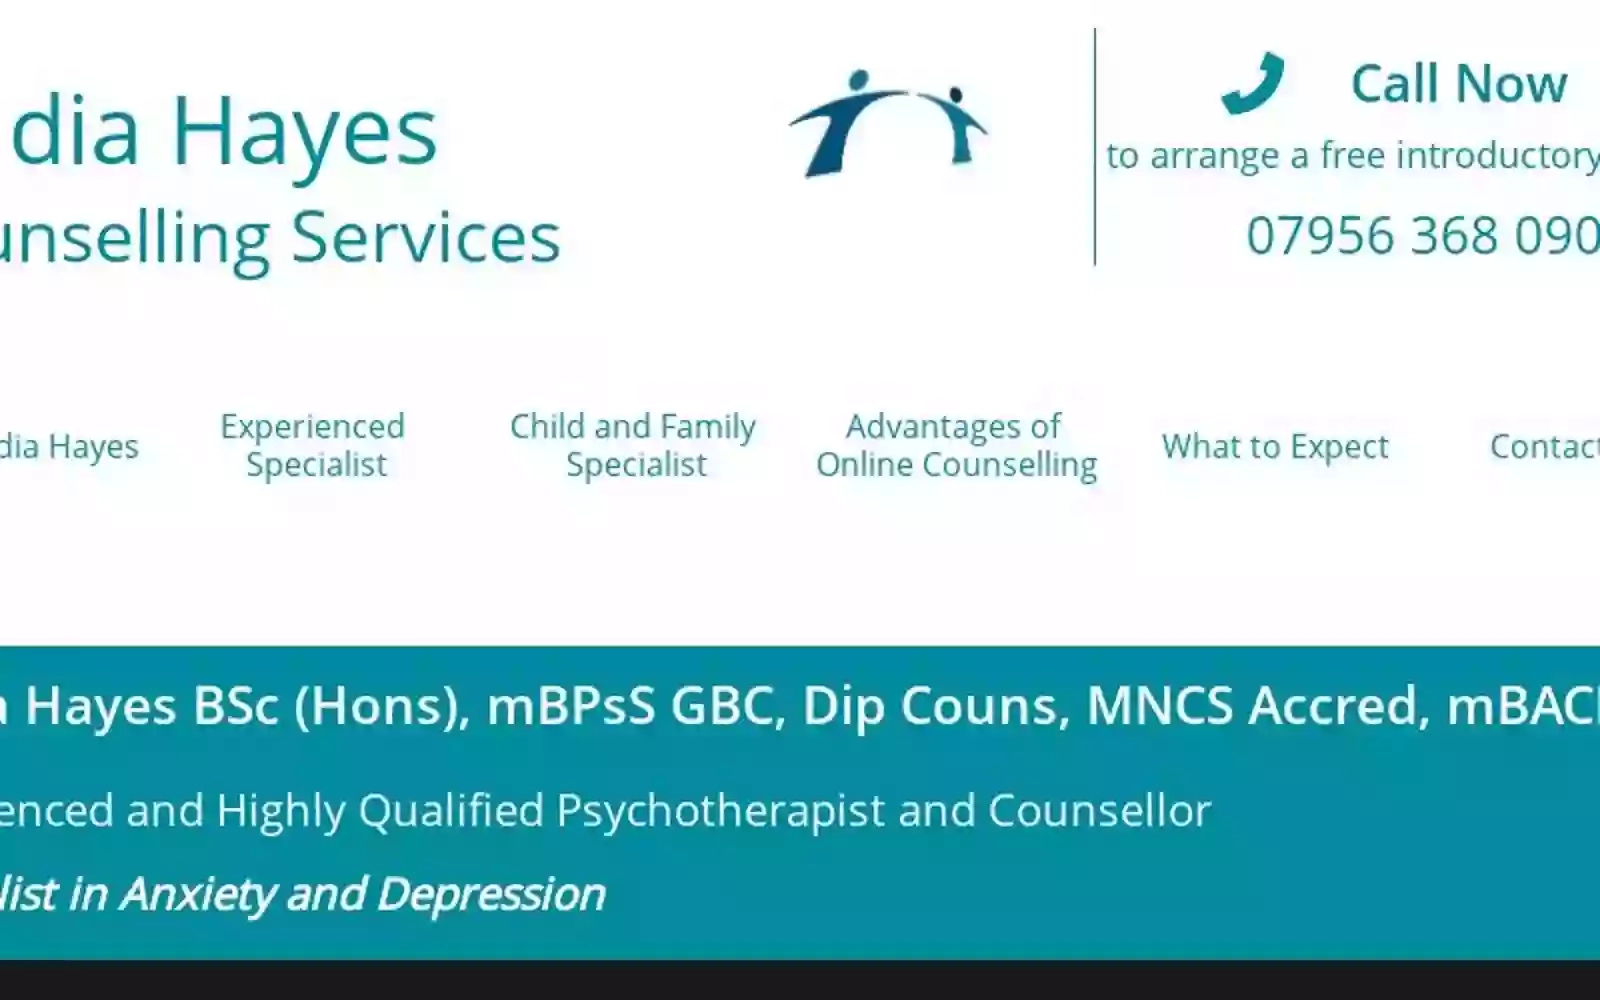 Nadia Hayes Counselling Services